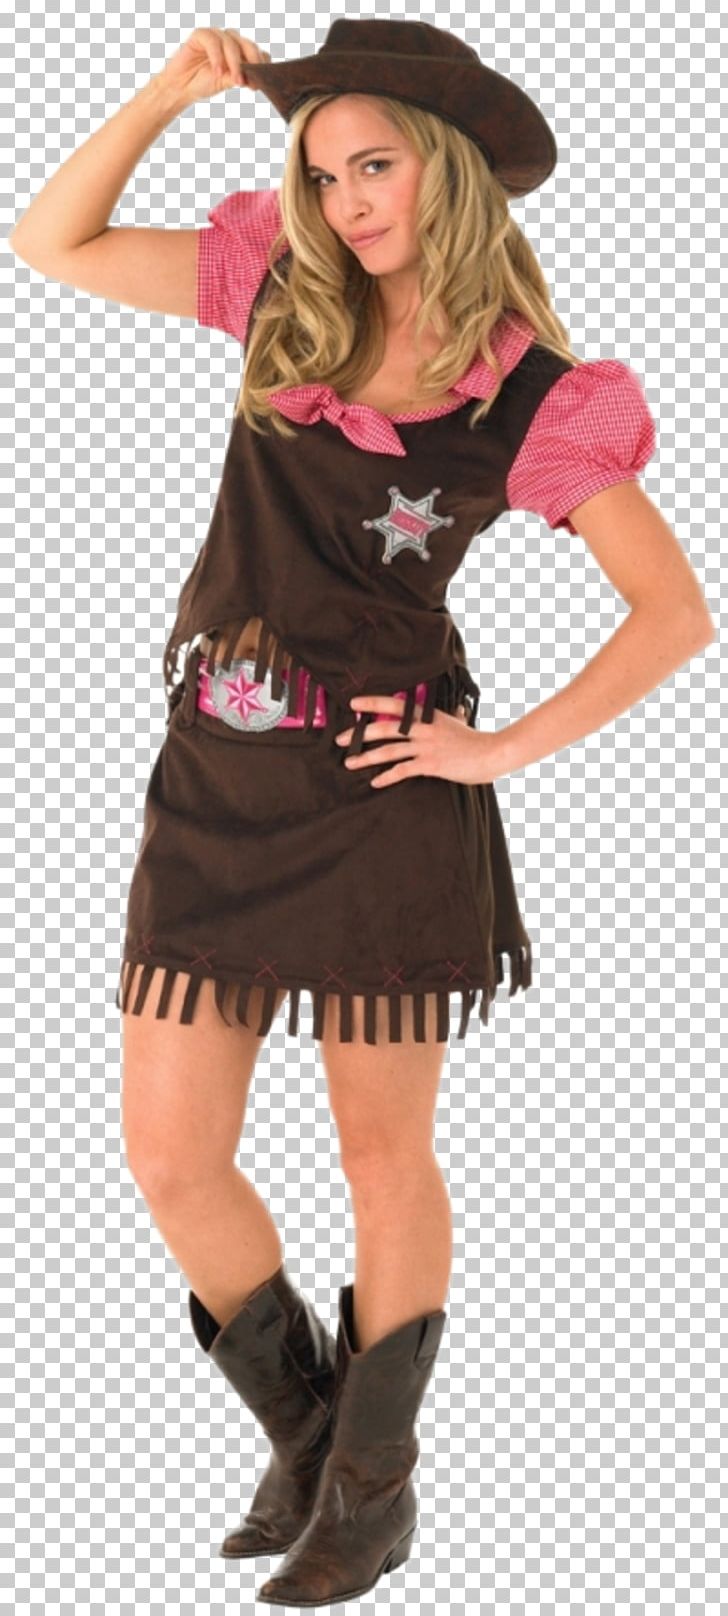 American Frontier Costume Party Cowboy Dress PNG, Clipart, Adult, American Frontier, Clothing, Clothing Sizes, Costume Free PNG Download